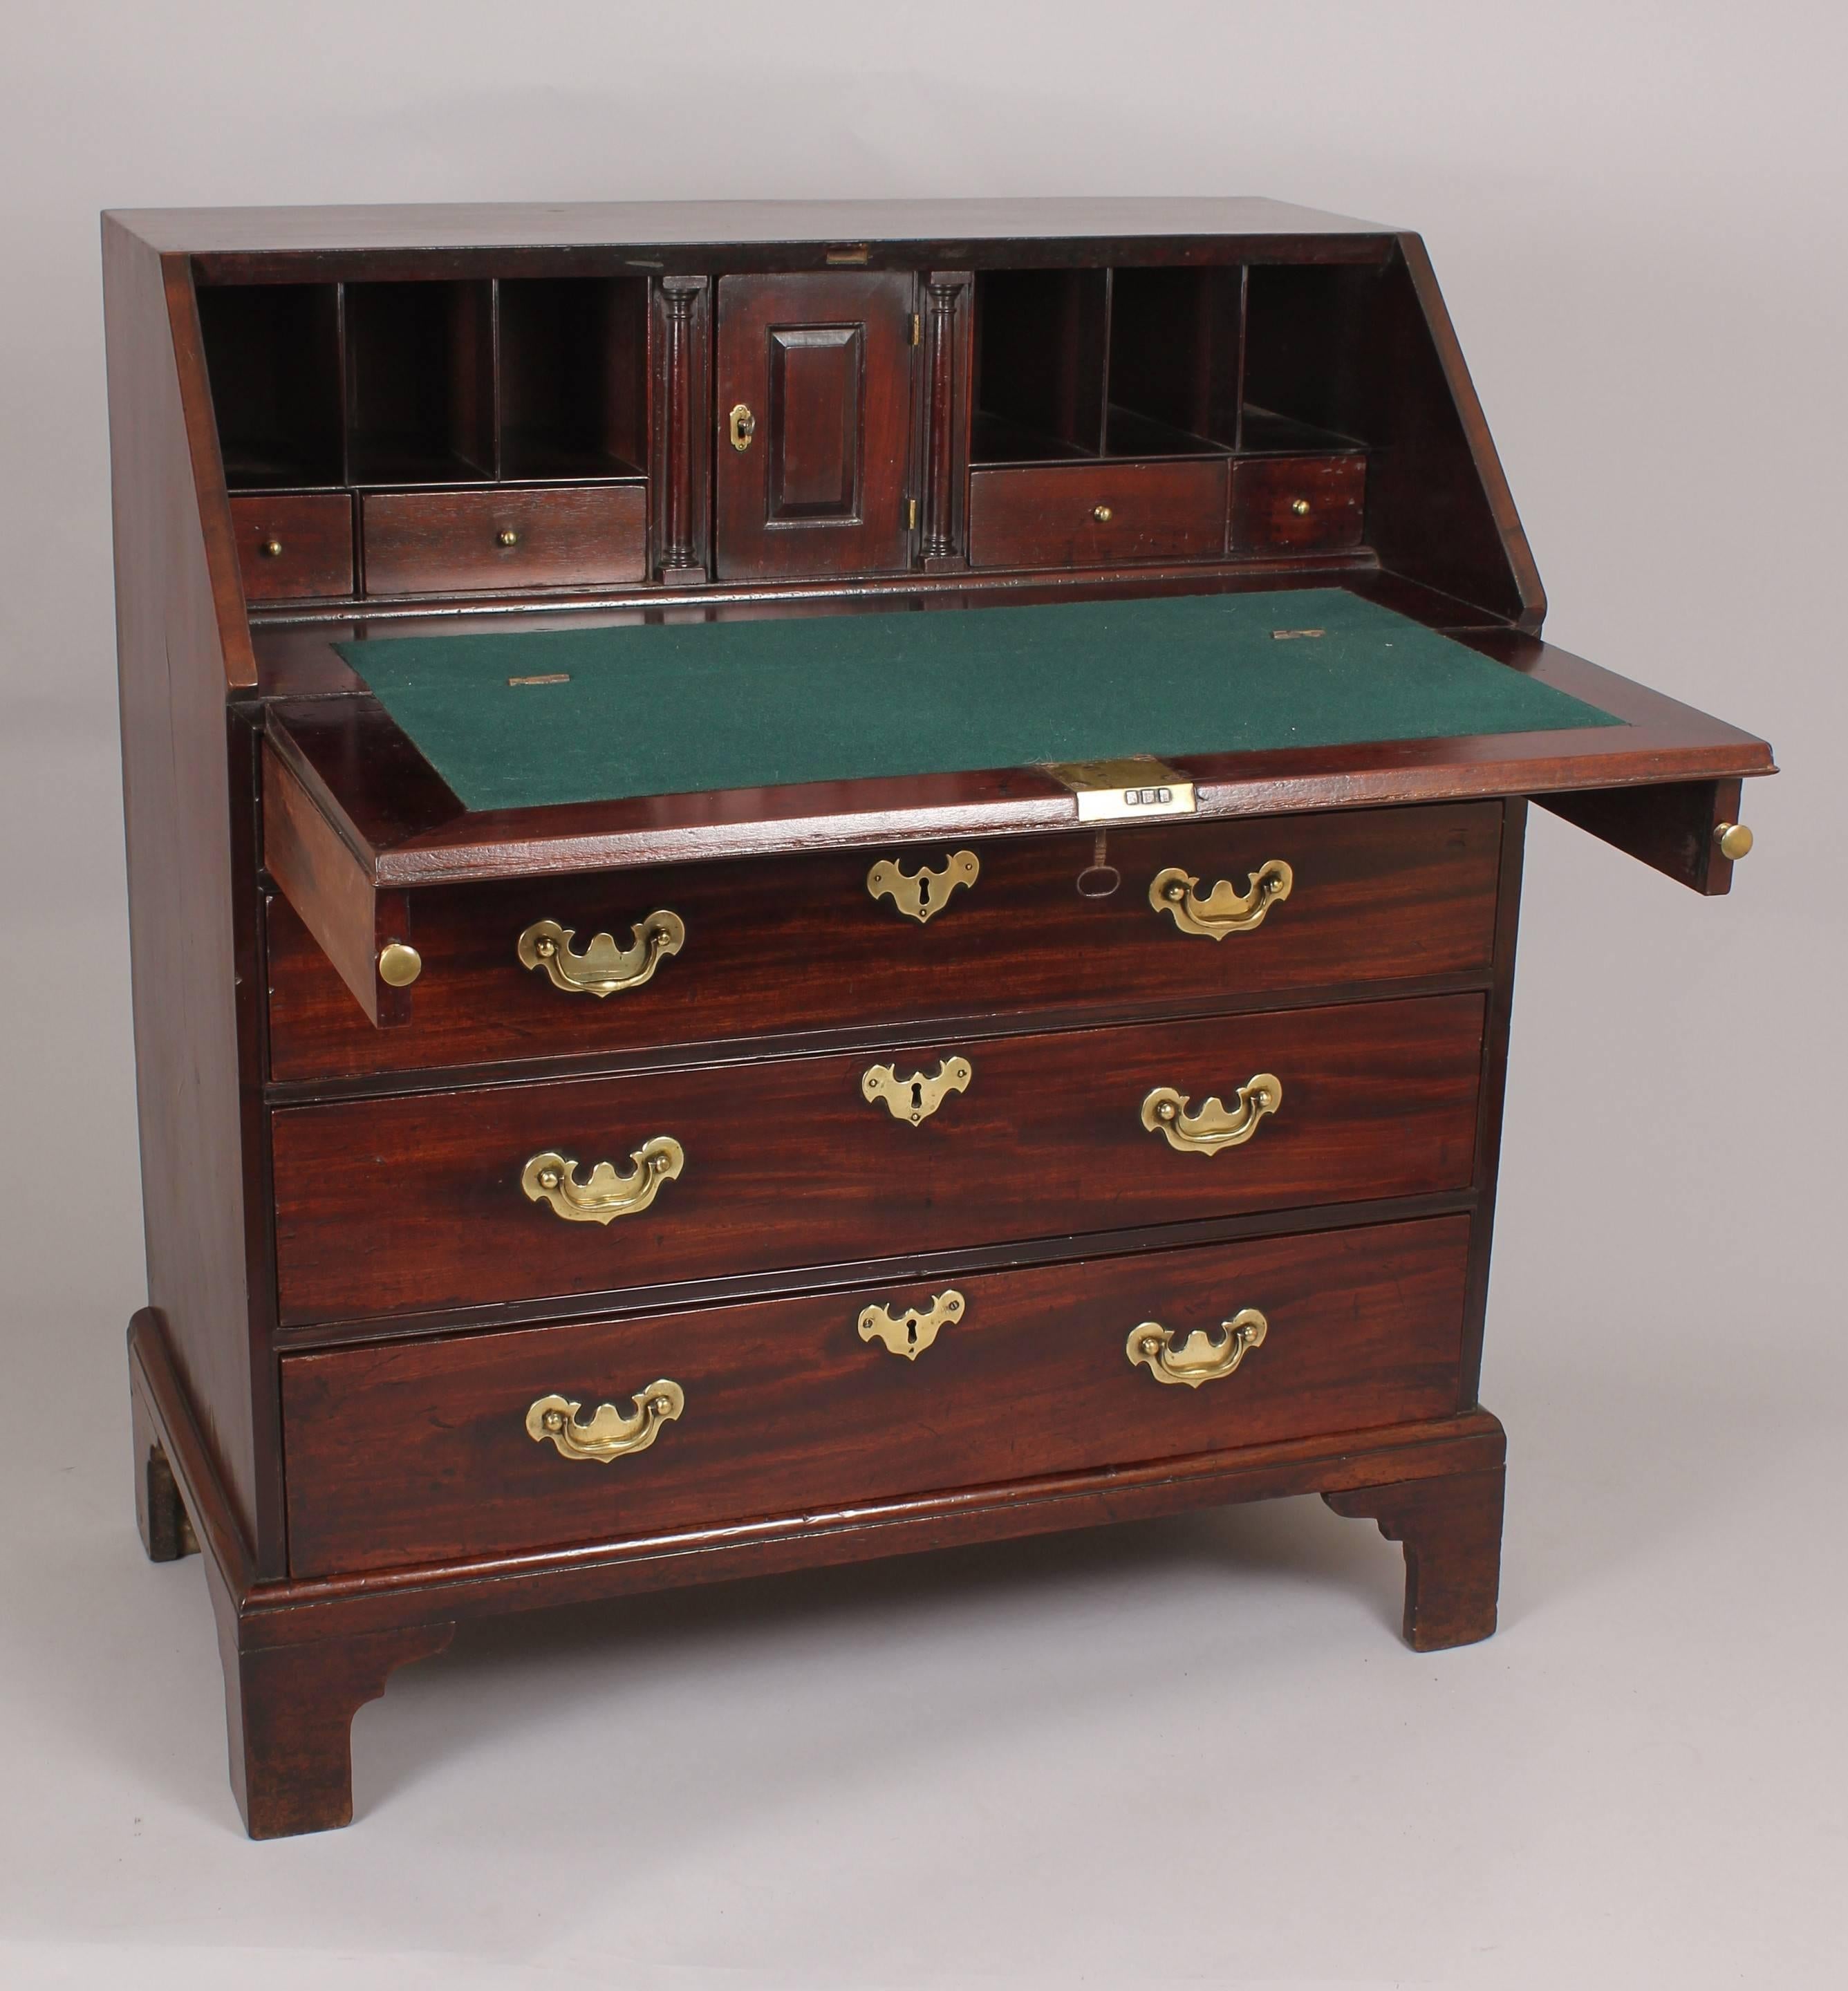 Early George III period mahogany bureau; the well-fitted interior with a central cupboard and 'secret' pilaster drawers, enclosed by a cleated flap; the lower part with four graduated oak-lined drawers with fine original brass-work.